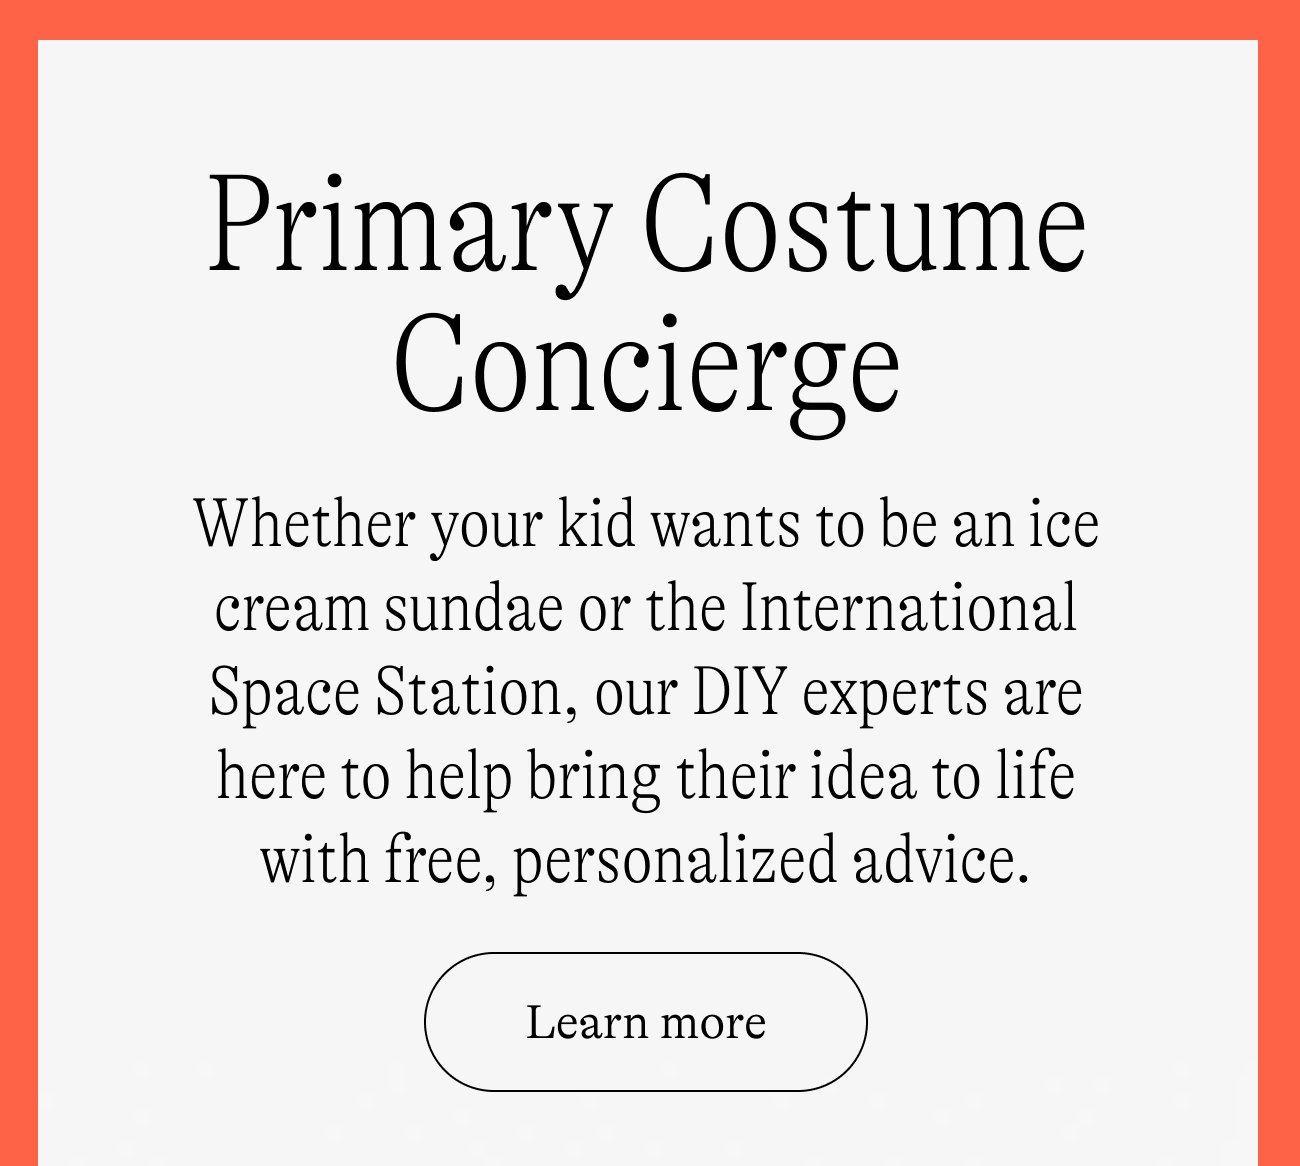 Primary Costume Concierge. Whether your kid wants to be an ice cream sundae or the International Space Station, our DIY experts are here to help bring their idea to life with free, personalized advice. Learn more.